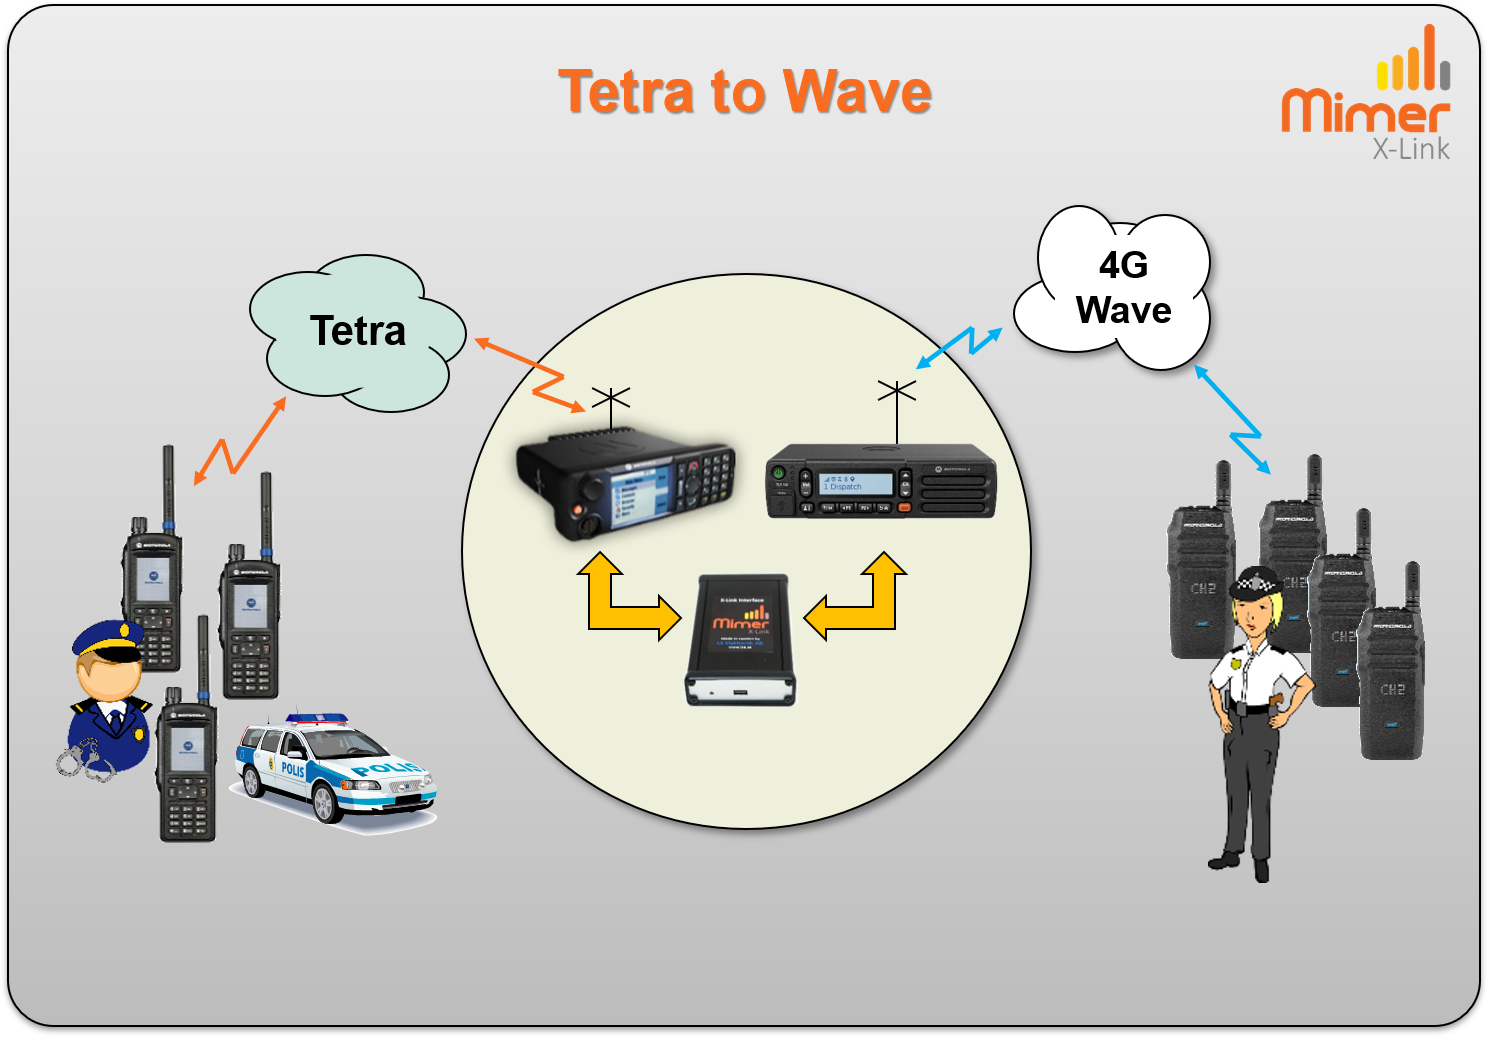 X-link connection of Tetra to Wave